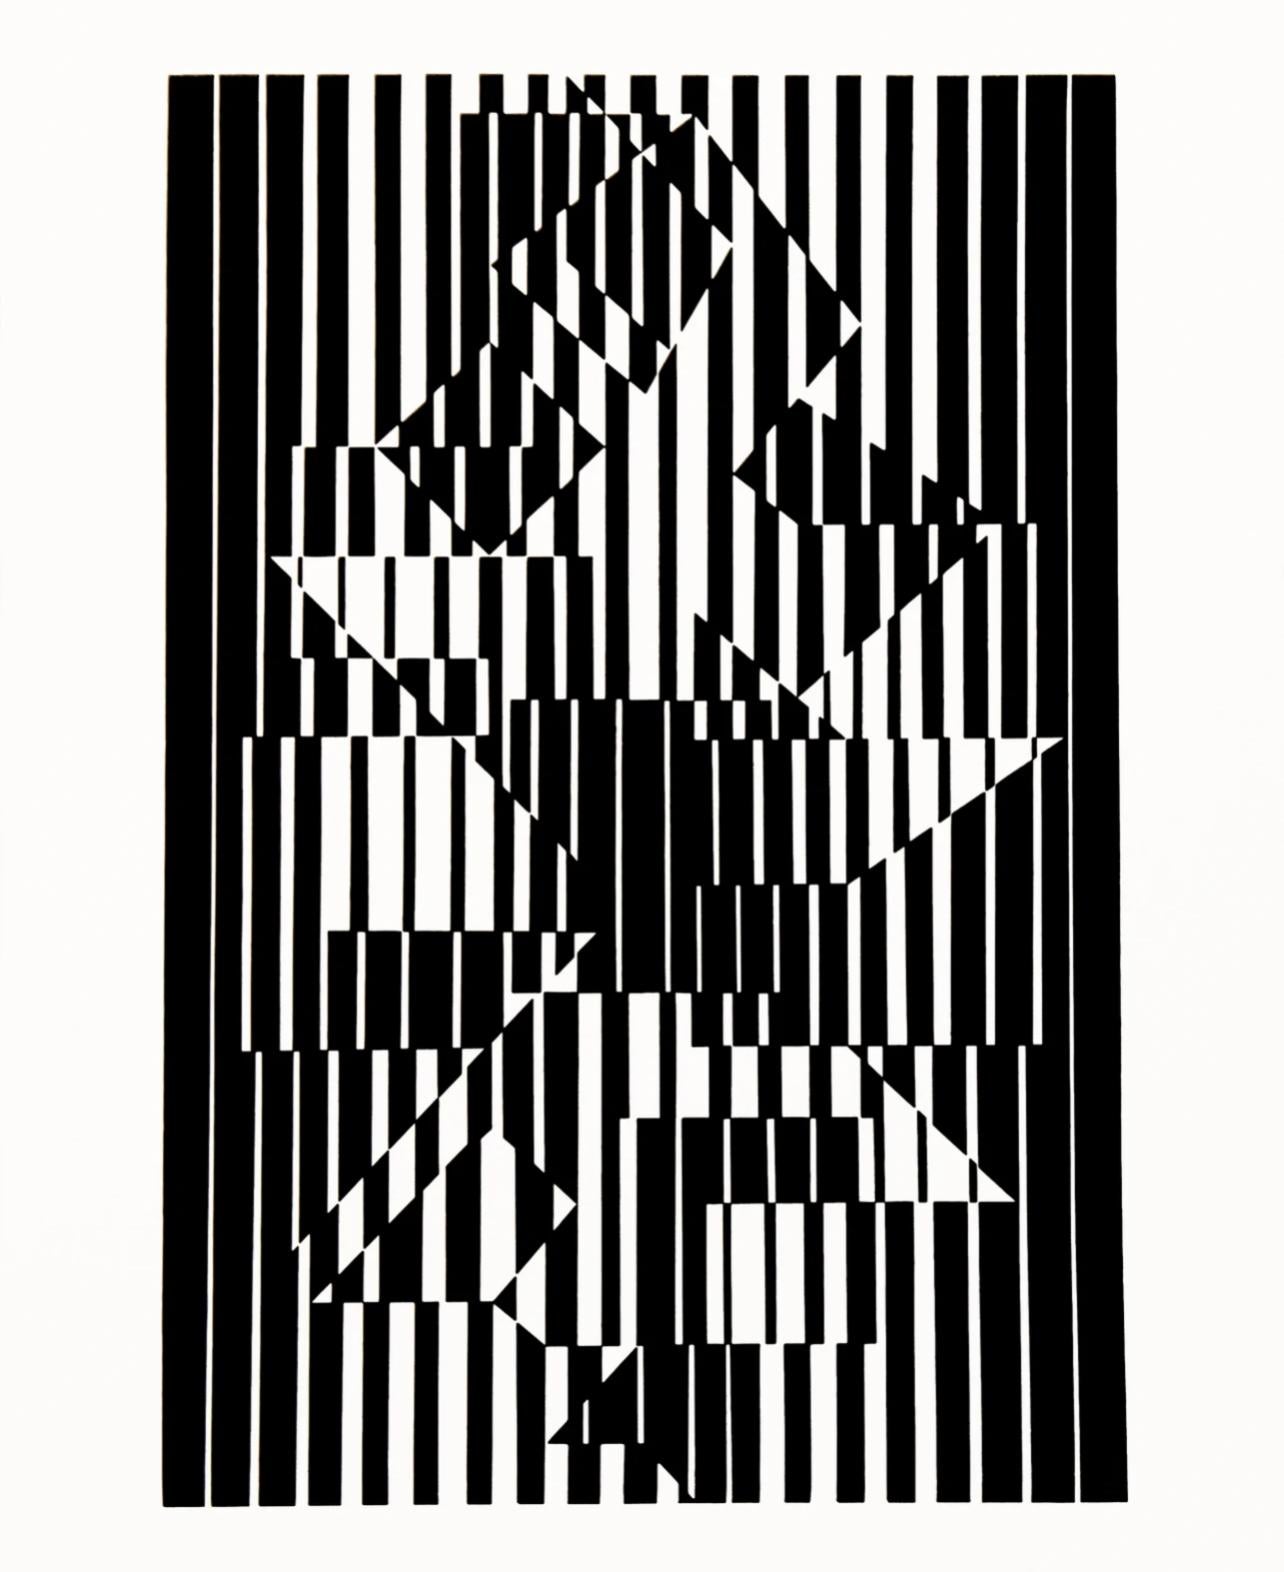 Vasarely, Composition, Linéaires (after) - Print by Victor Vasarely